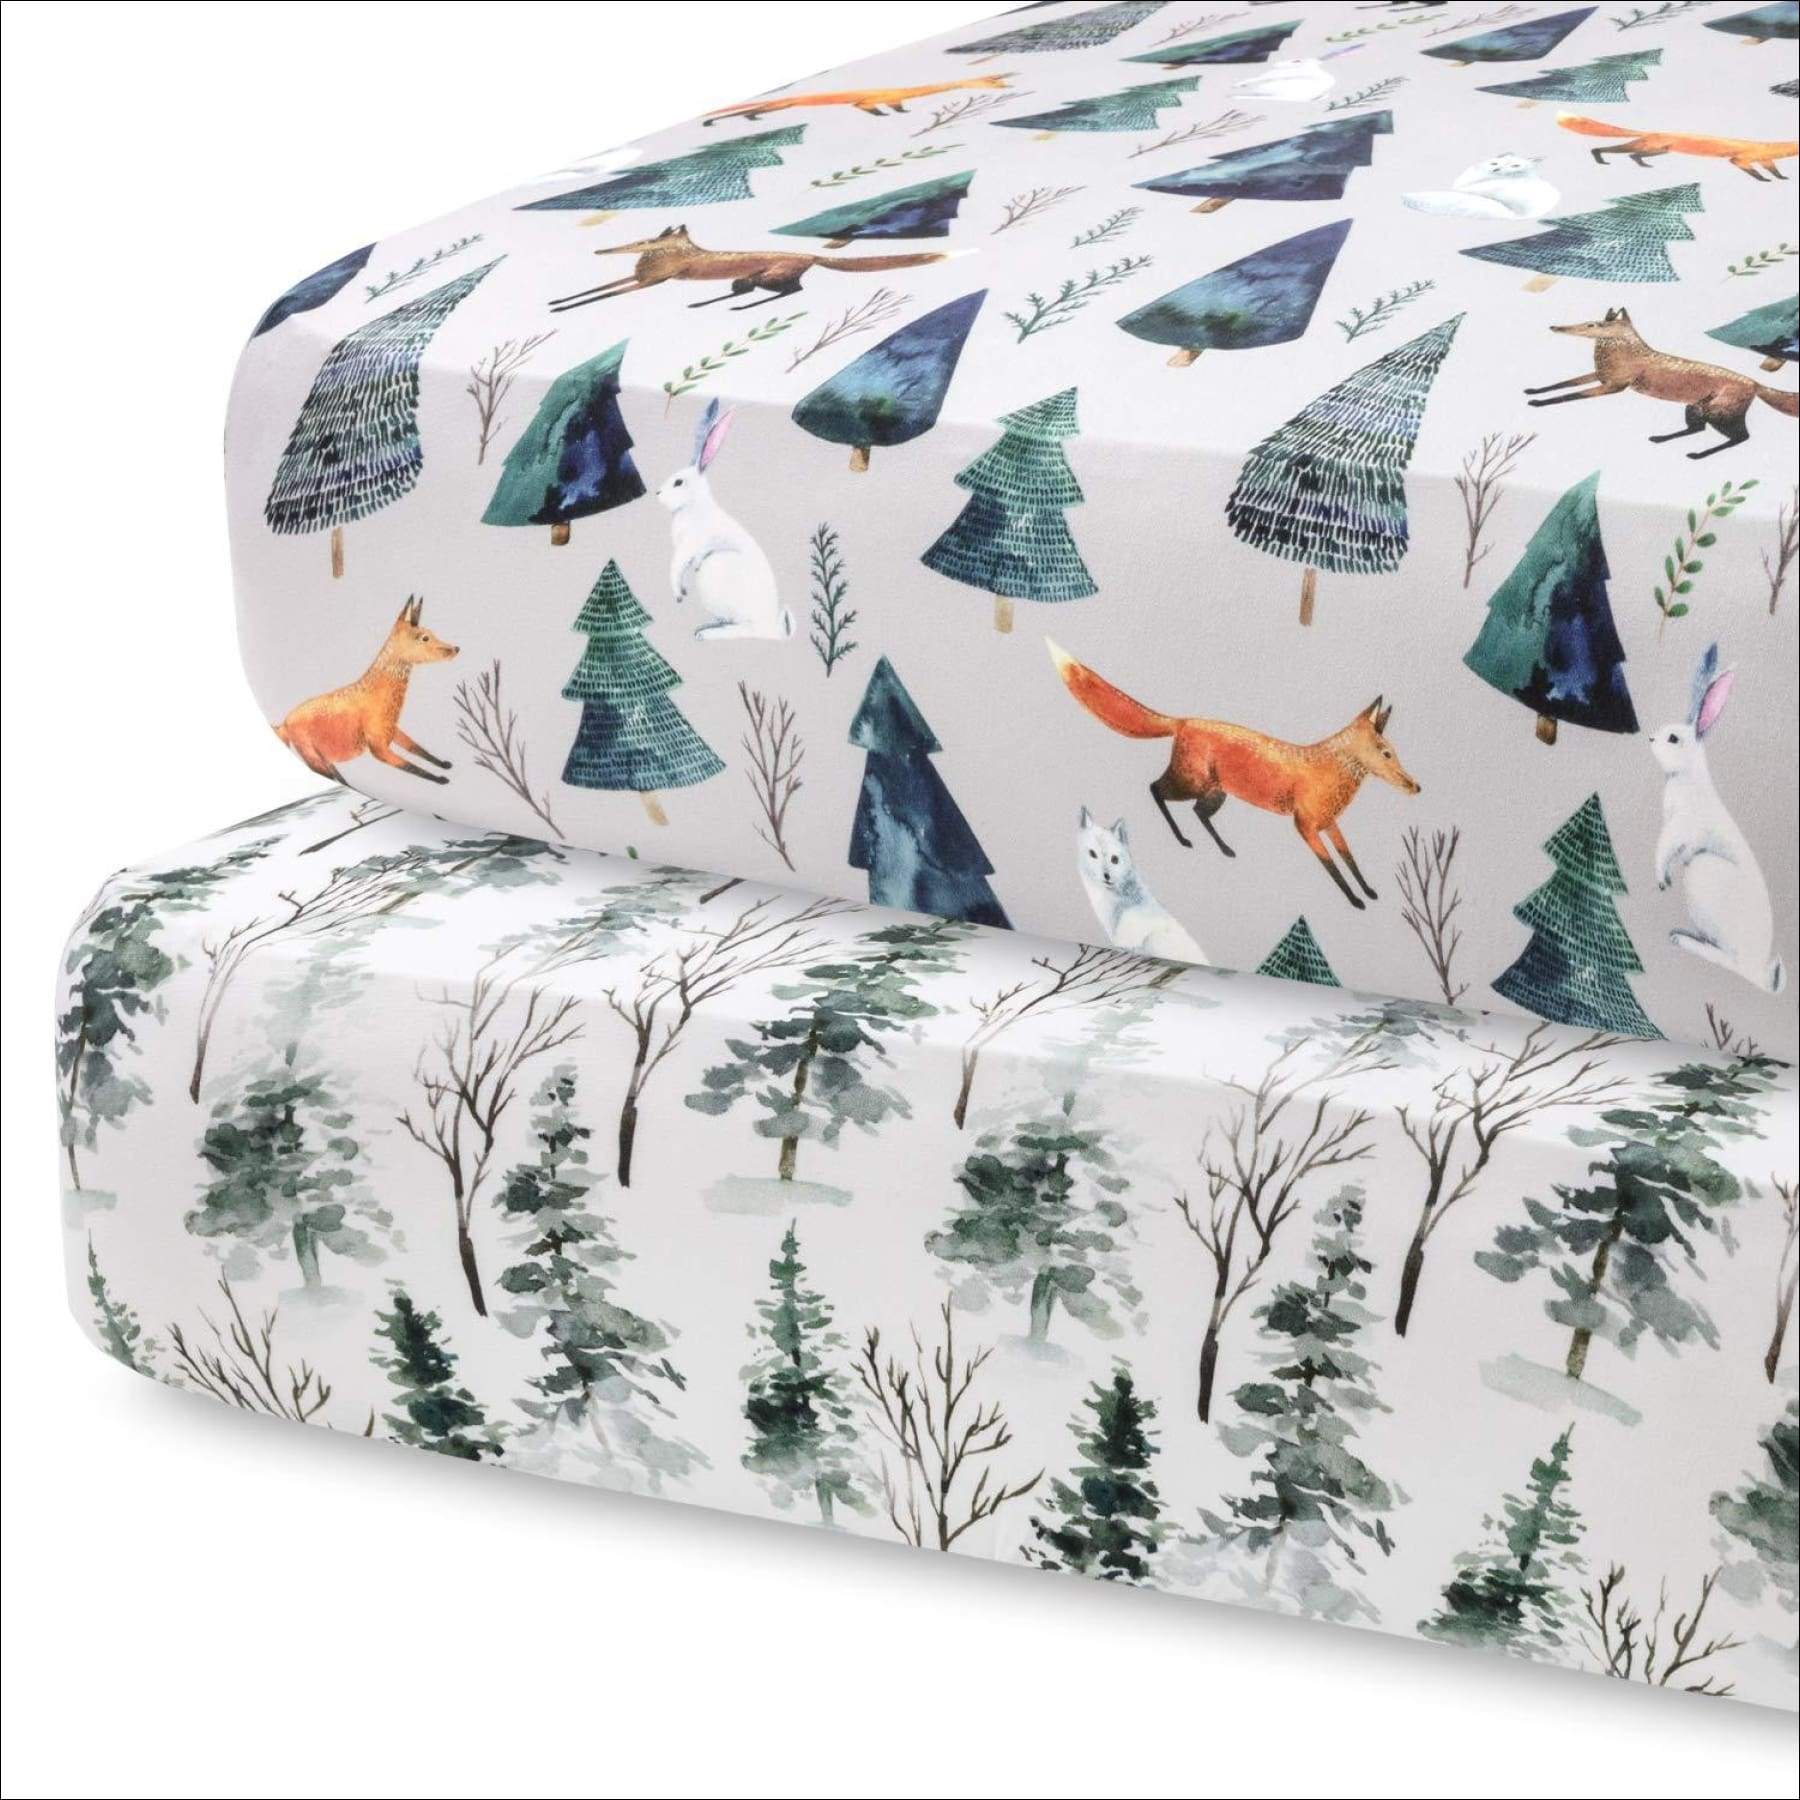 - 2 Pack Premium Fitted Crib Sheets for Standard Crib Mattress - Ultra-Soft Organic Cotton Blend, Stylish Animal Woodland Pattern, Safe and Snug for Baby (Magical)